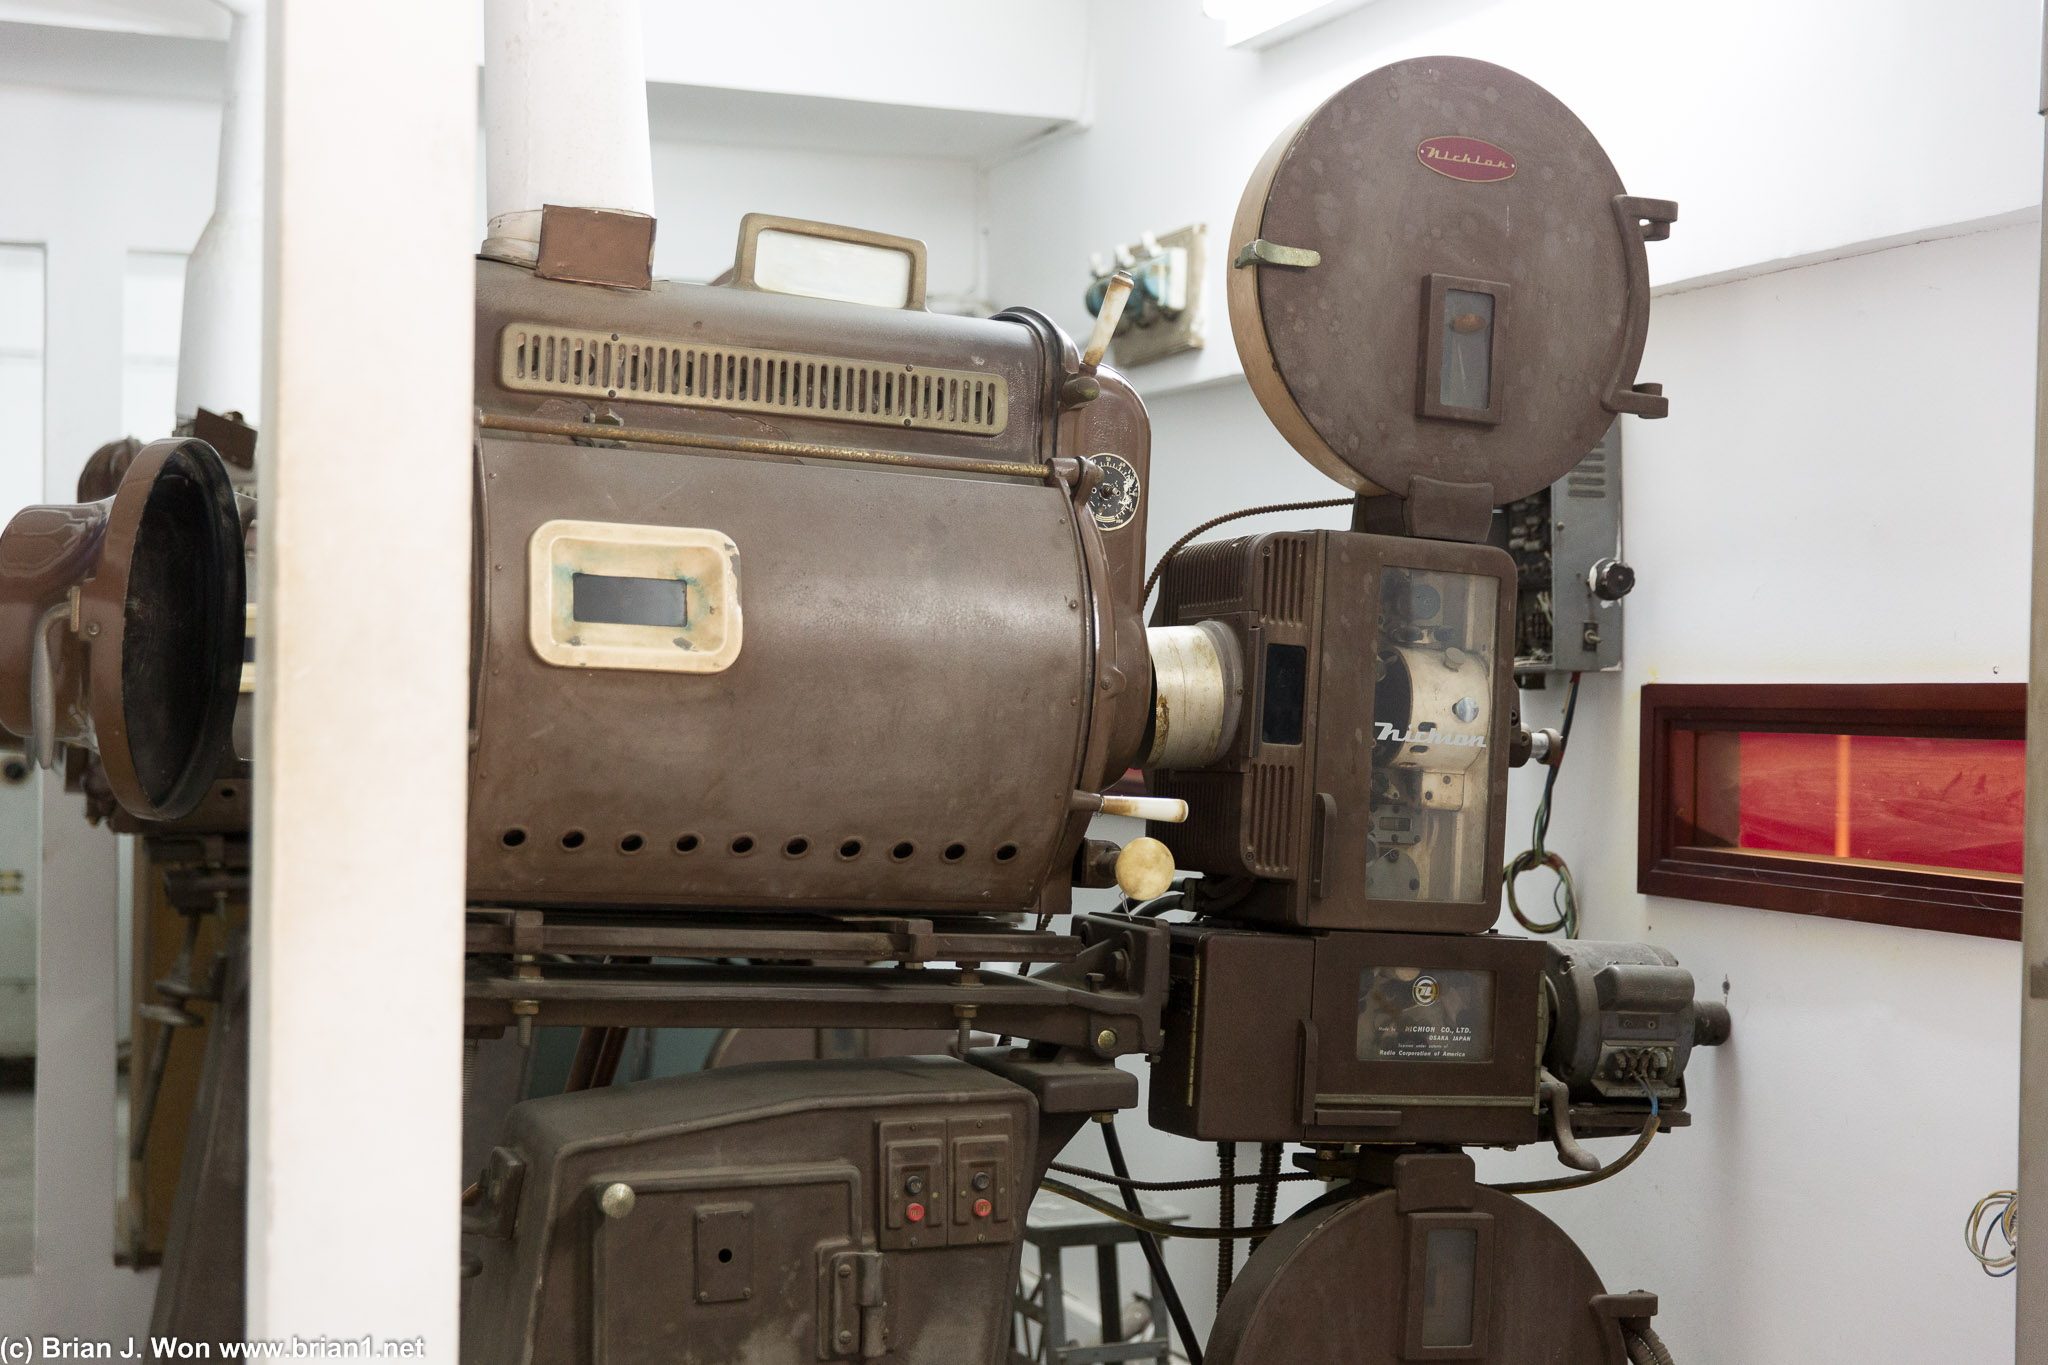 Probably the original projector for the cinema.